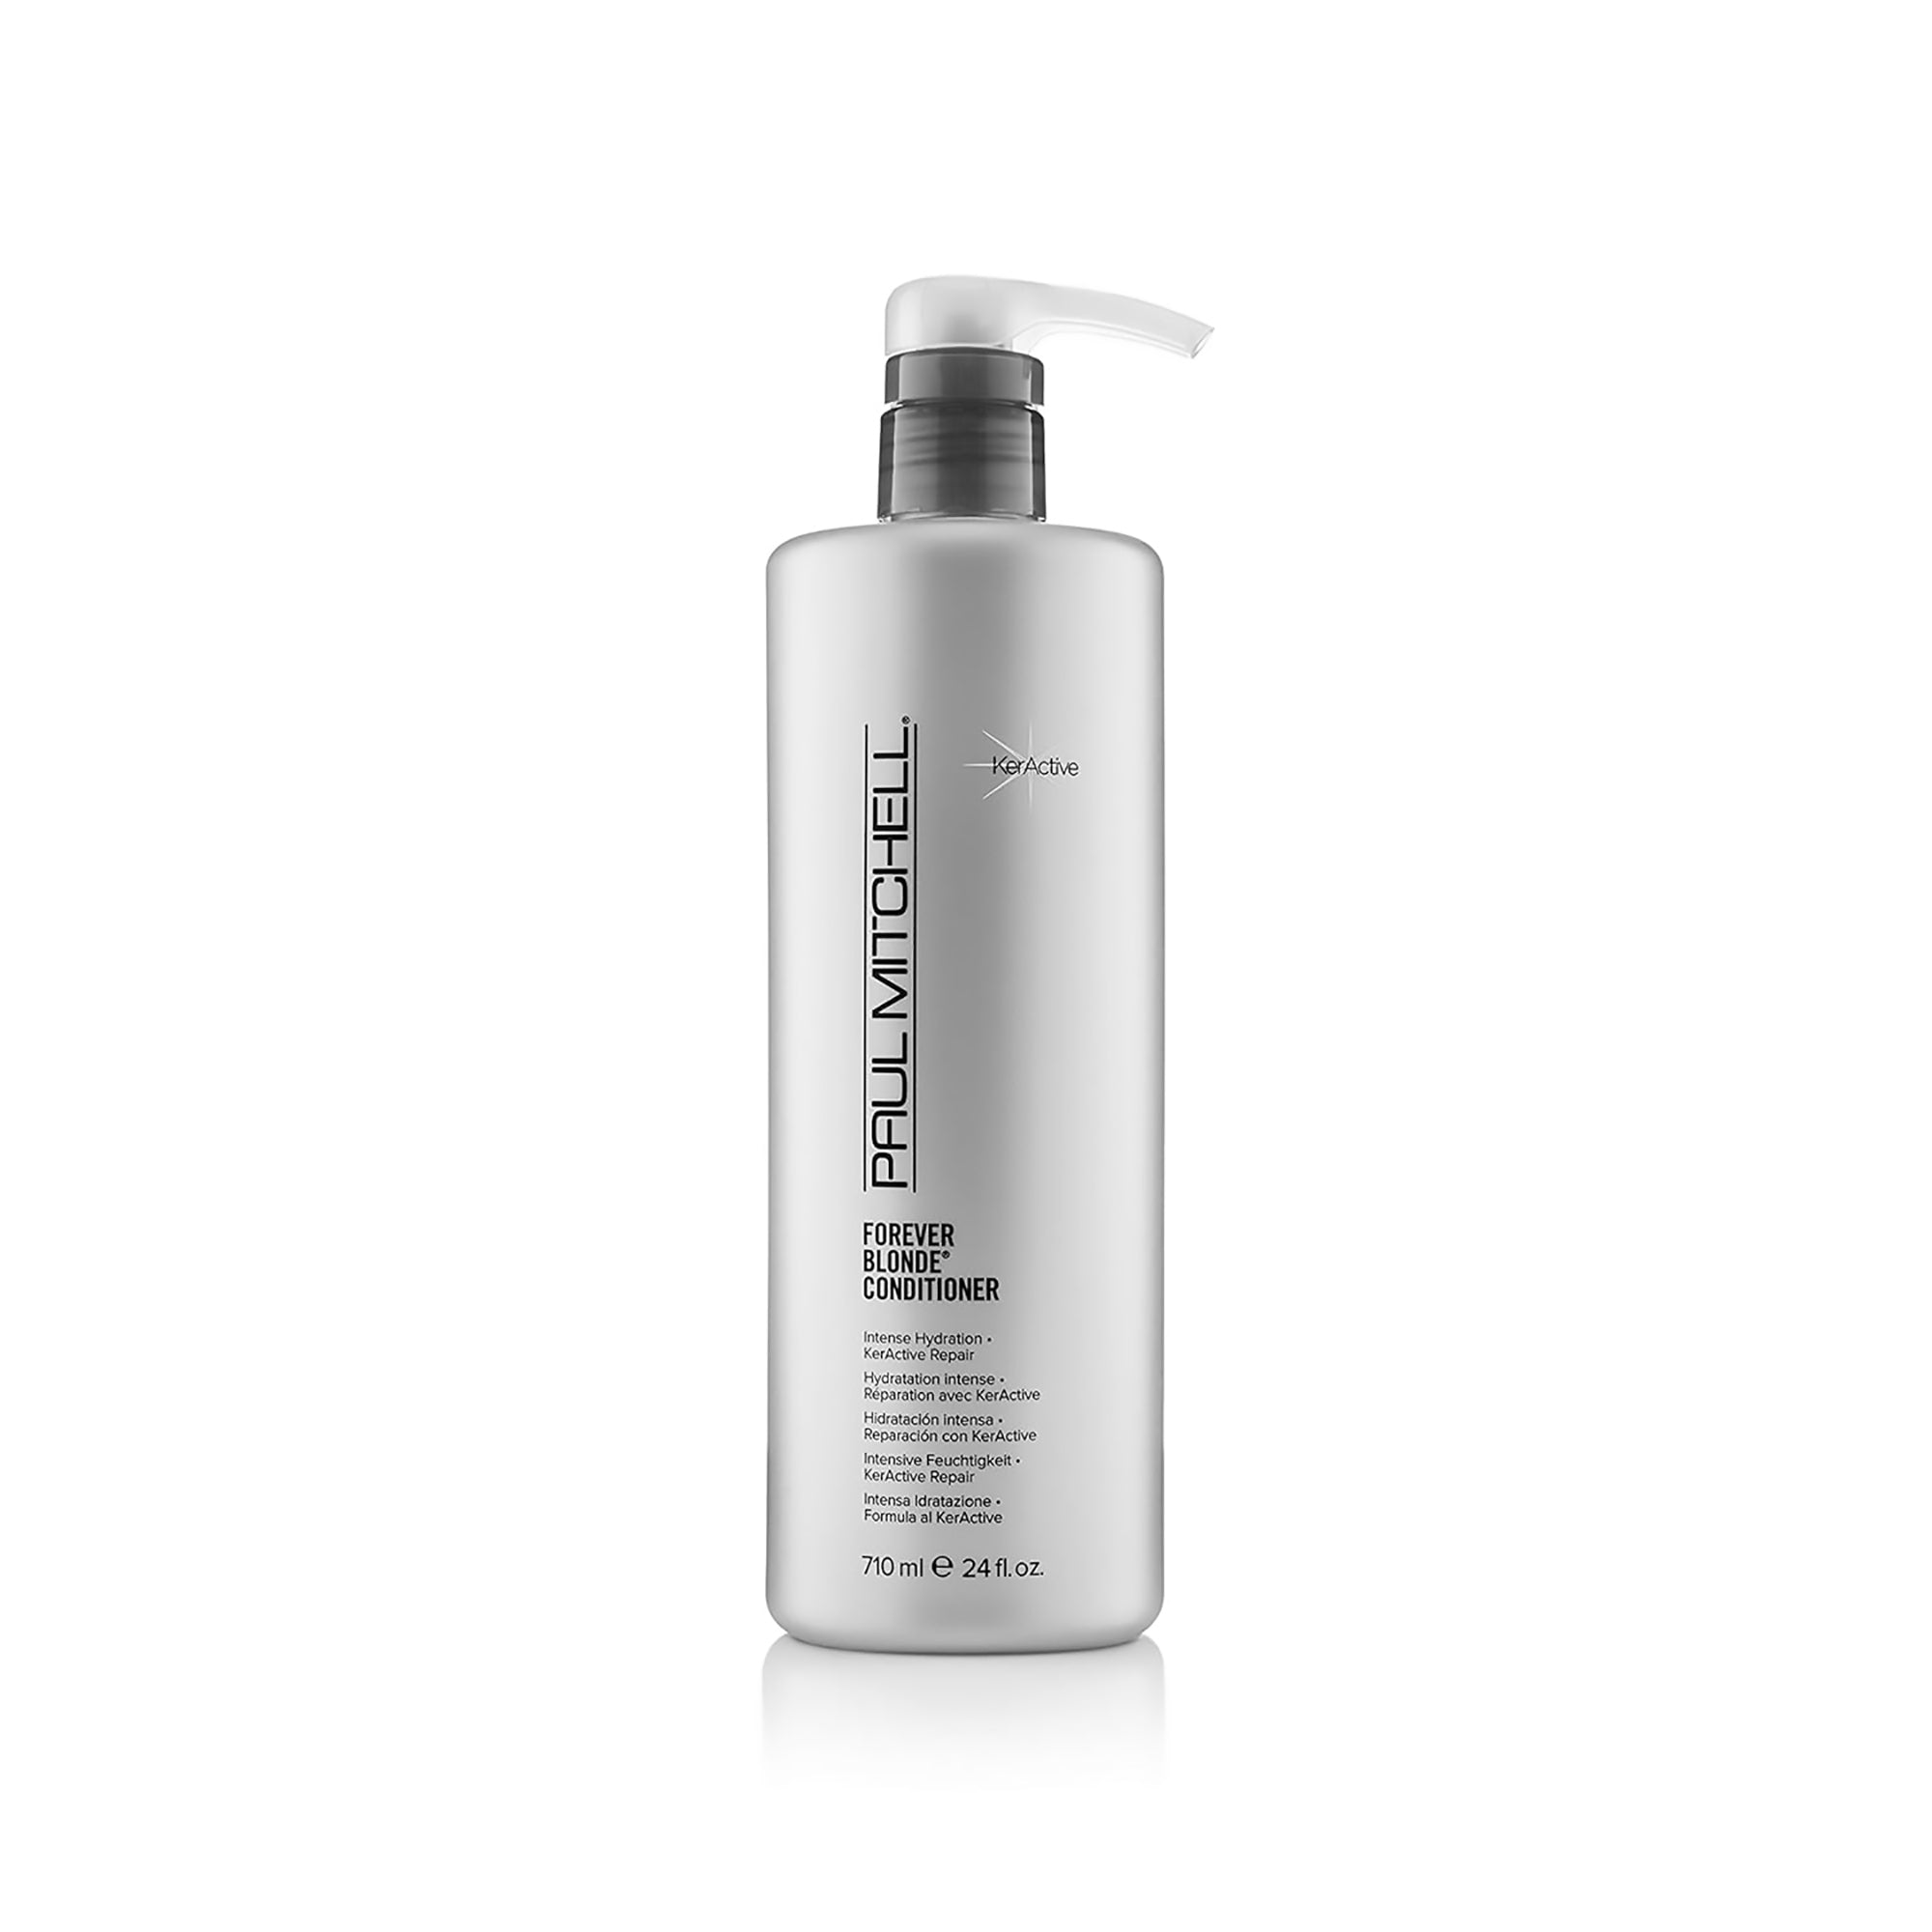 Paul Mitchell Forever Blonde Shampoo & Conditioner 24 oz ($78.50 Value)